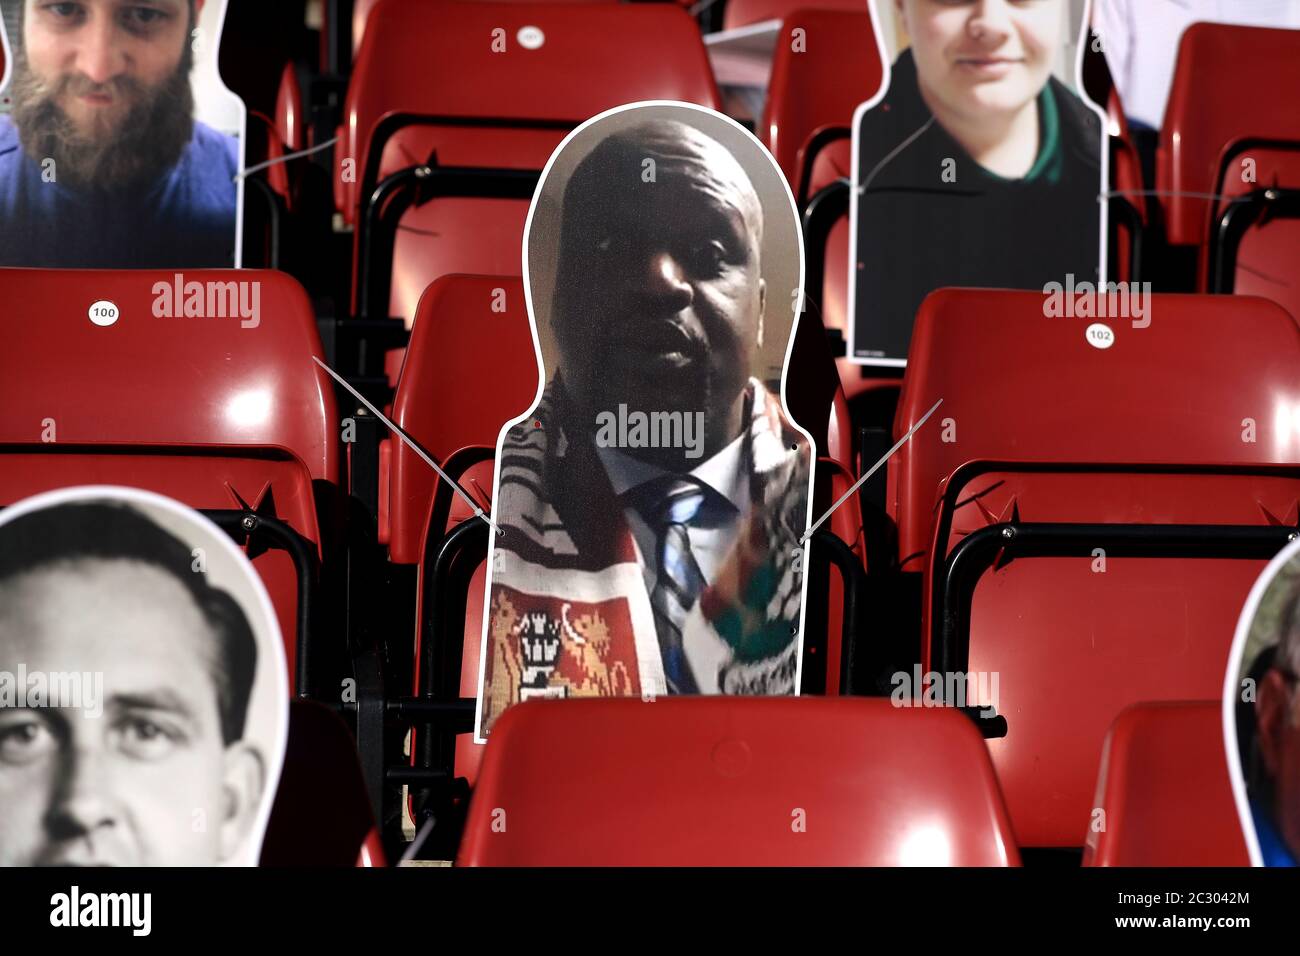 Cardboard cutout of former NBA basketball player and Northampton Town fan Shaquille O'Neal in the stands during the Sky Bet League Two play-off semi final first leg match at the PTS Academy Stadium, Northampton. Stock Photo